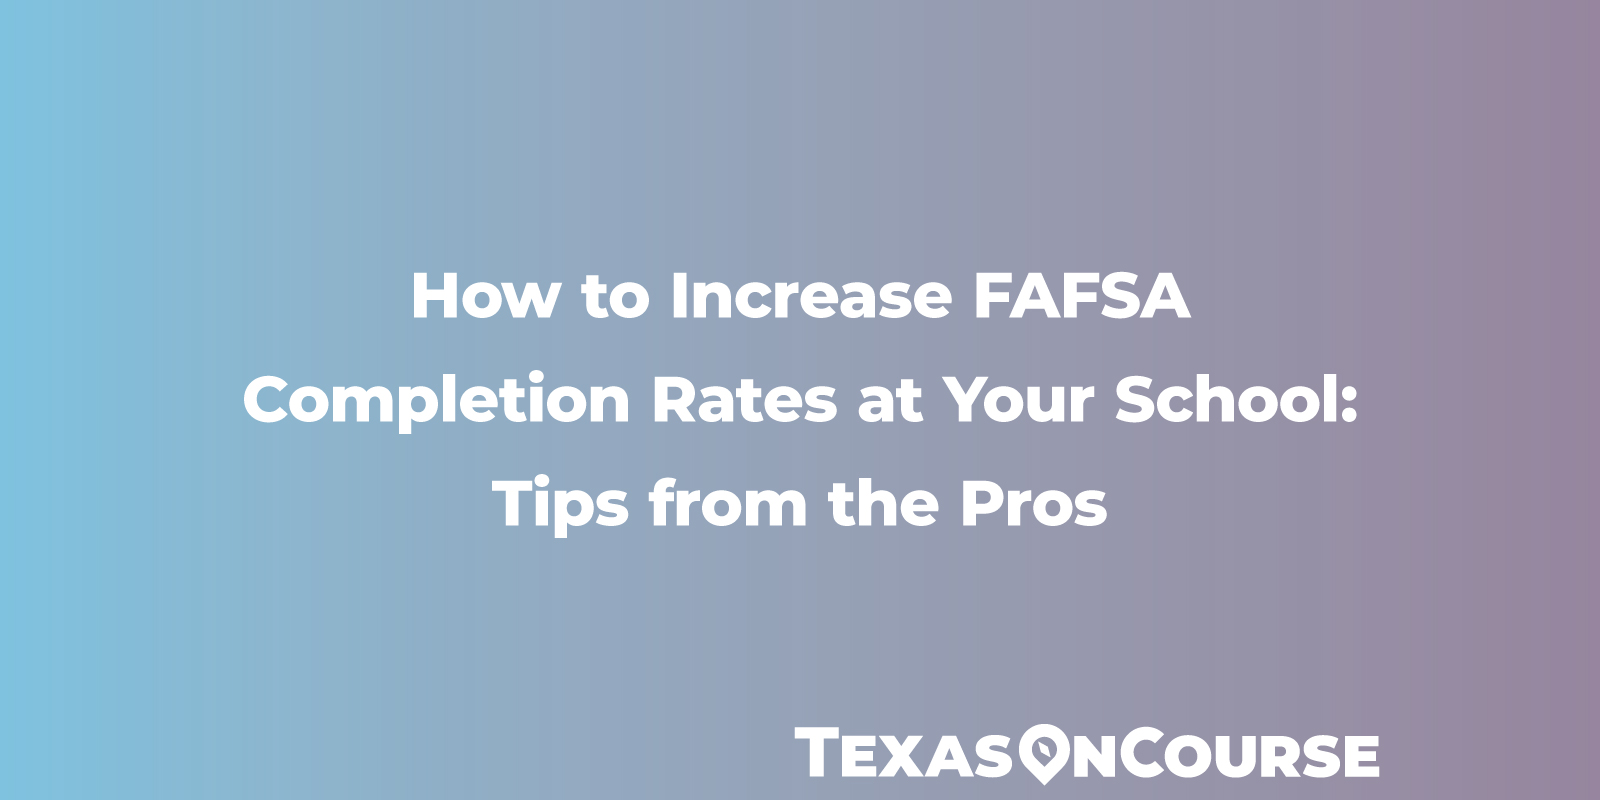 How to Increase FAFSA Completion Rates at Your School: Tips from the Pros